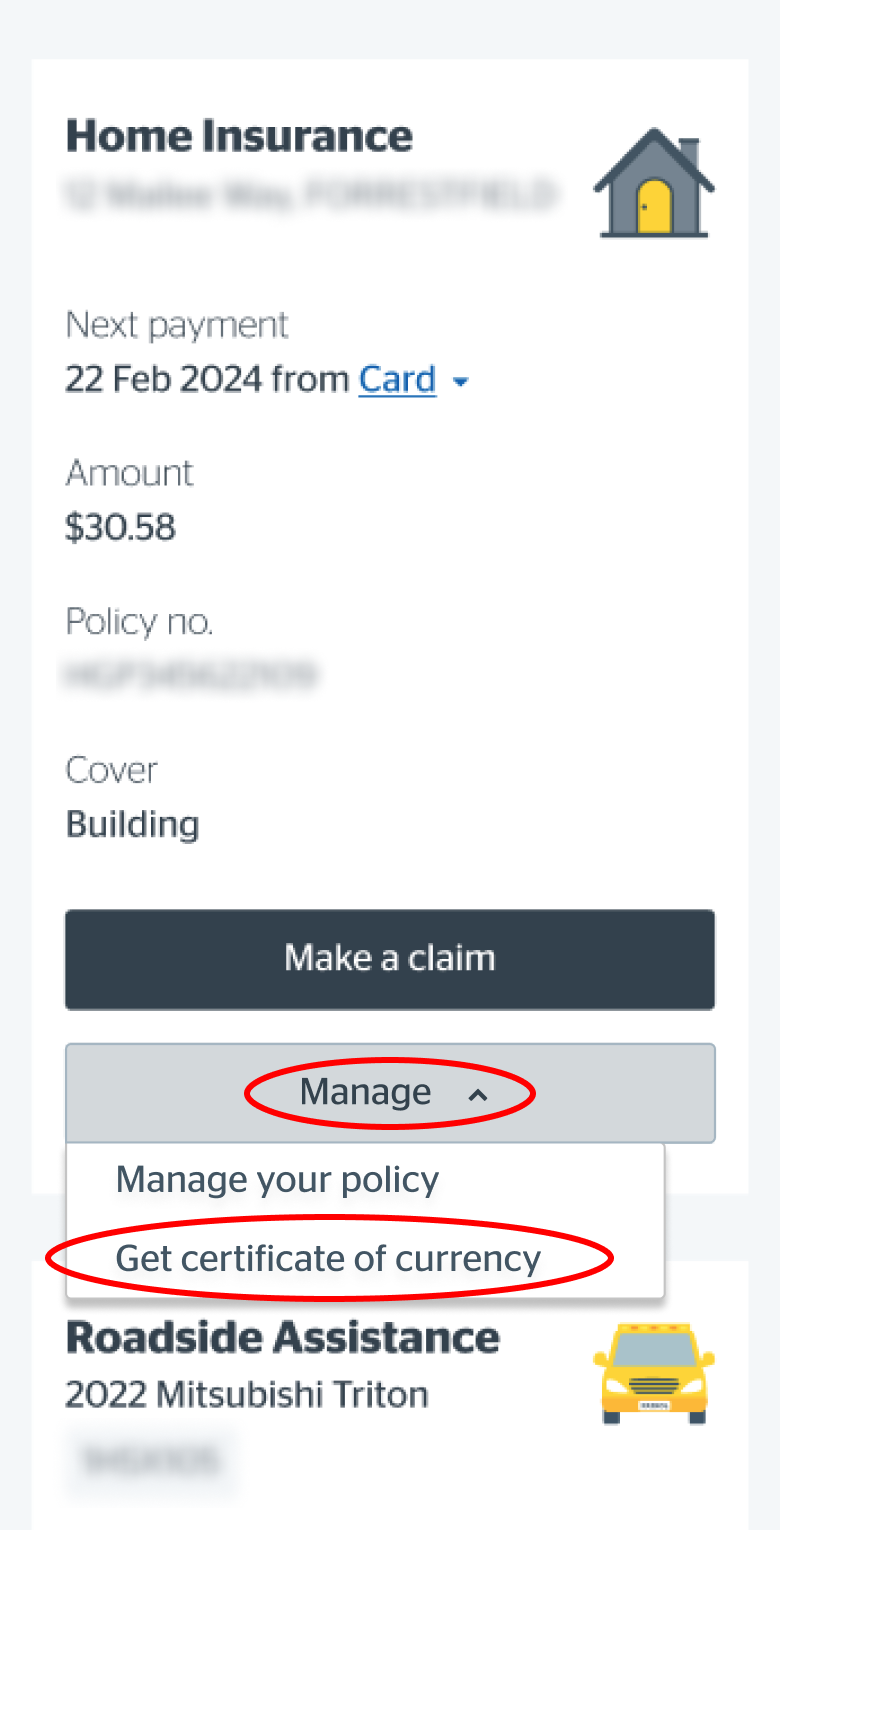 Selecting Get certificate of currency on mobile